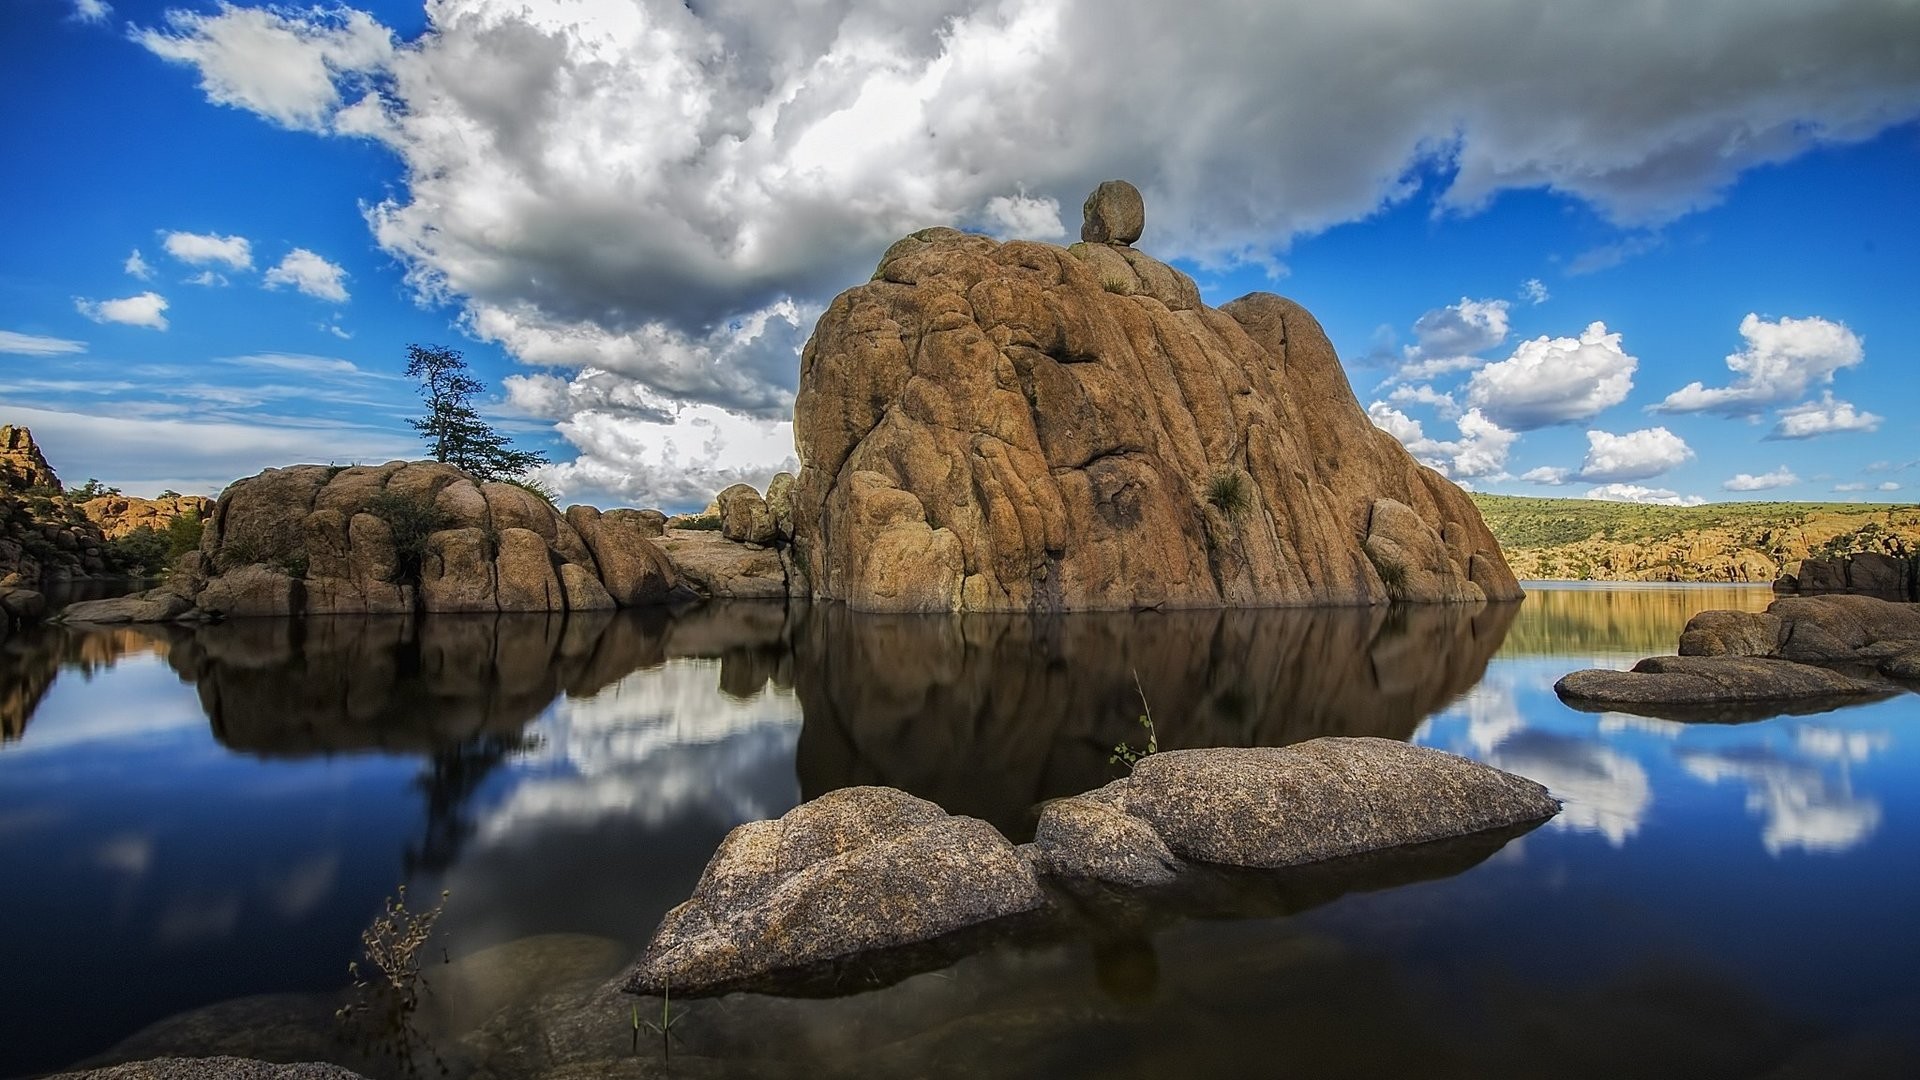 General 1920x1080 nature landscape rocks water sea clouds horizon stones trees reflection lake hills outdoors